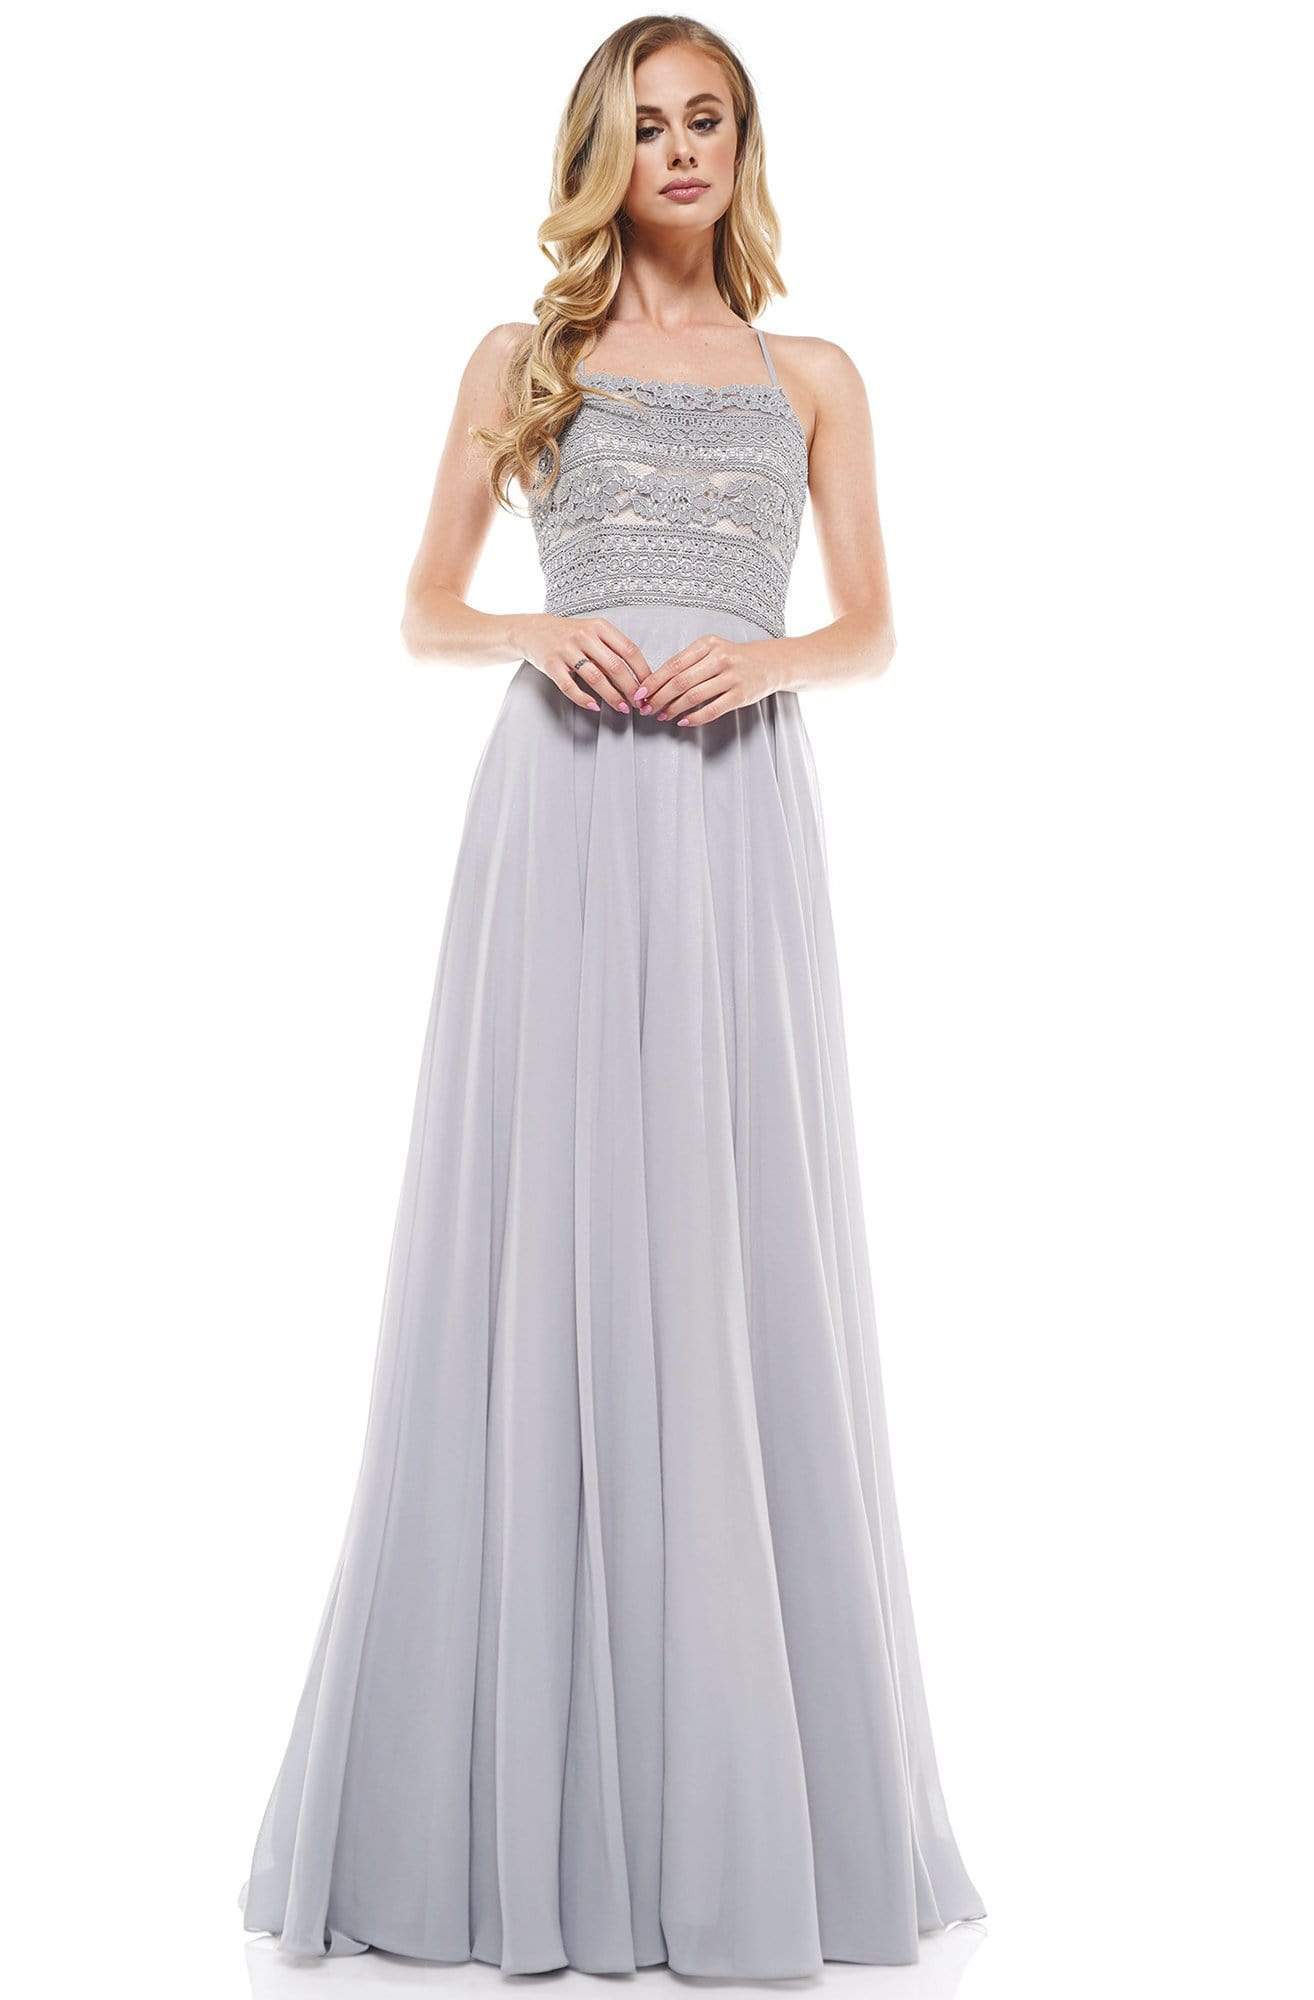 Glow Dress - G889 Strappy Sleeveless Lace Top Chiffon A-Line Gown Prom Dresses 0 / Grey